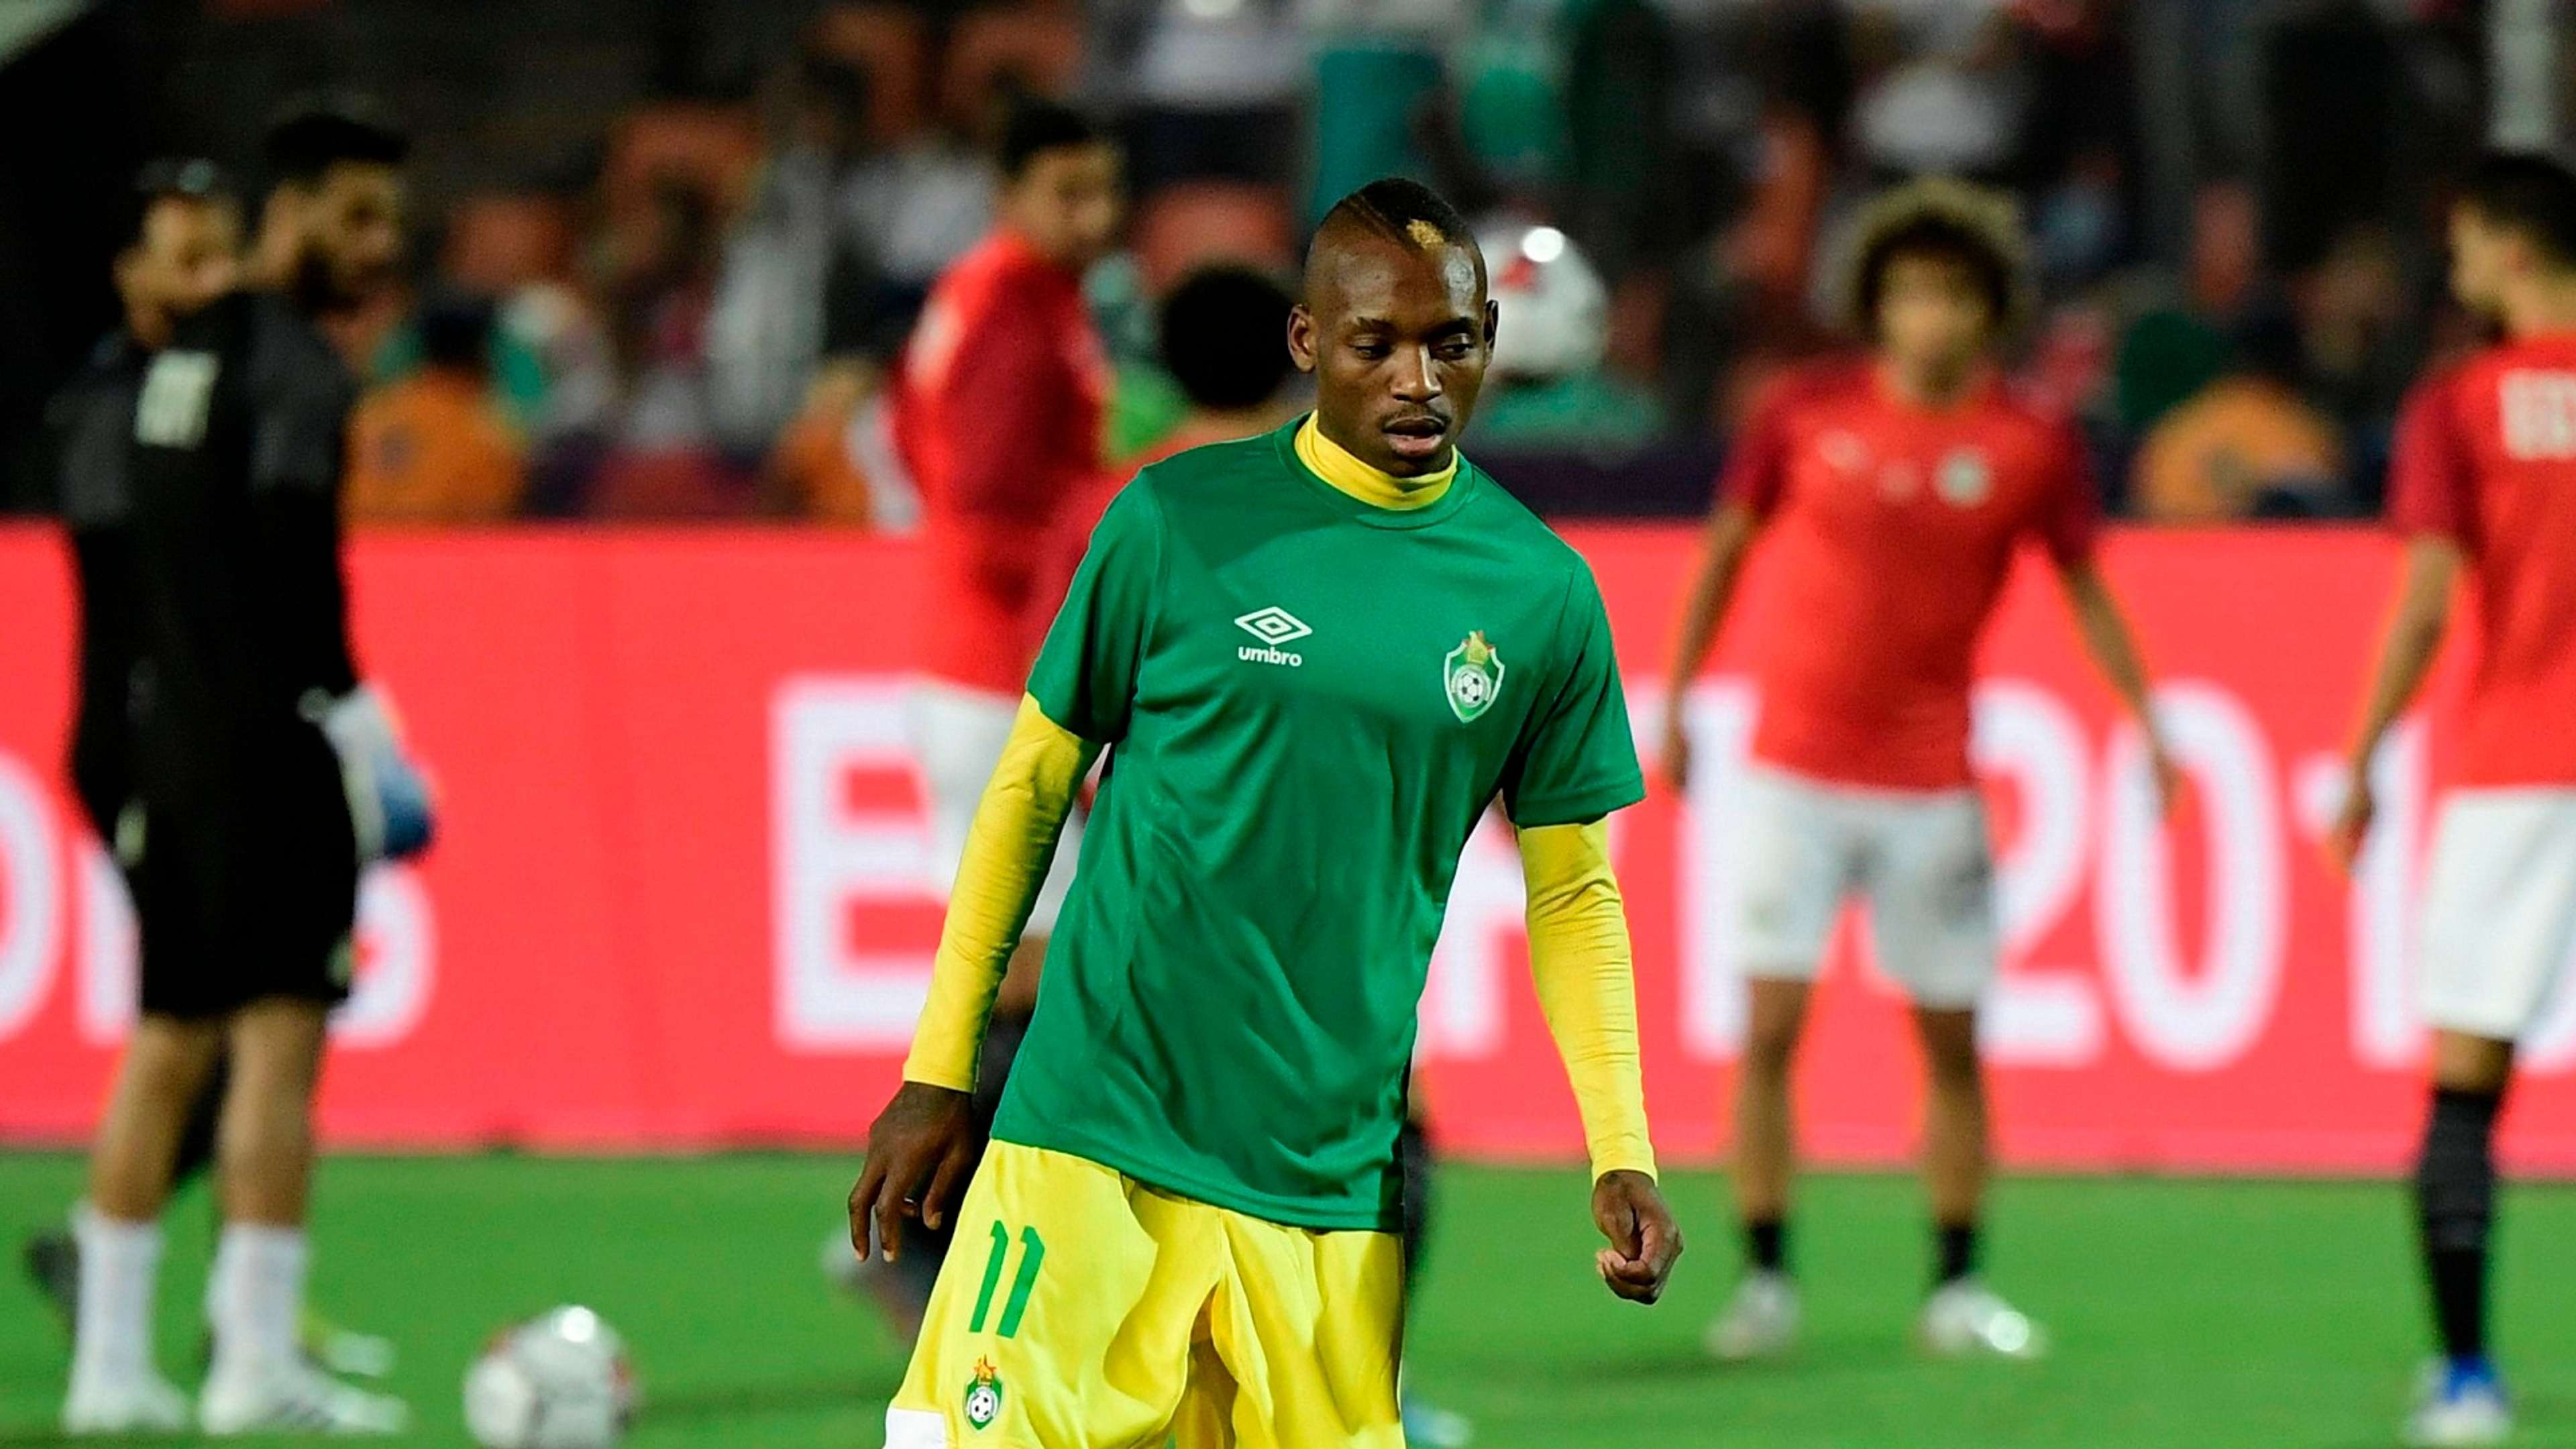 Zimbabwe's midfielder Khama Billiat (L) warms up ahead of the 2019 Africa Cup of Nations (CAN) football match between Egypt and Zimbabwe at Cairo International Stadium on June 21, 2019.j